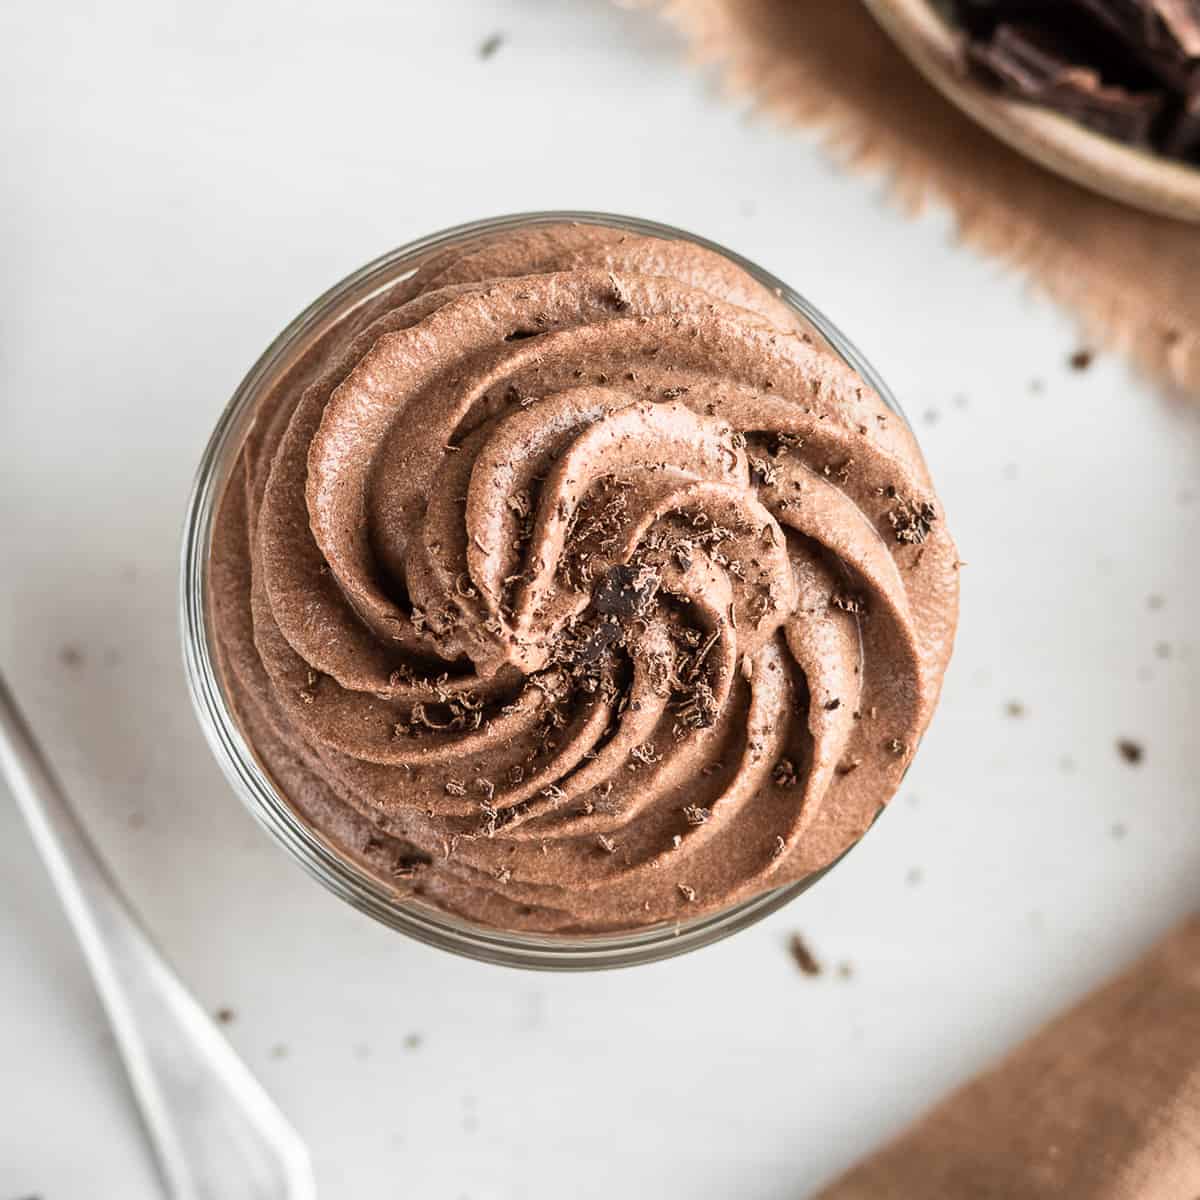 Chocolate whipped cream piped in a glass